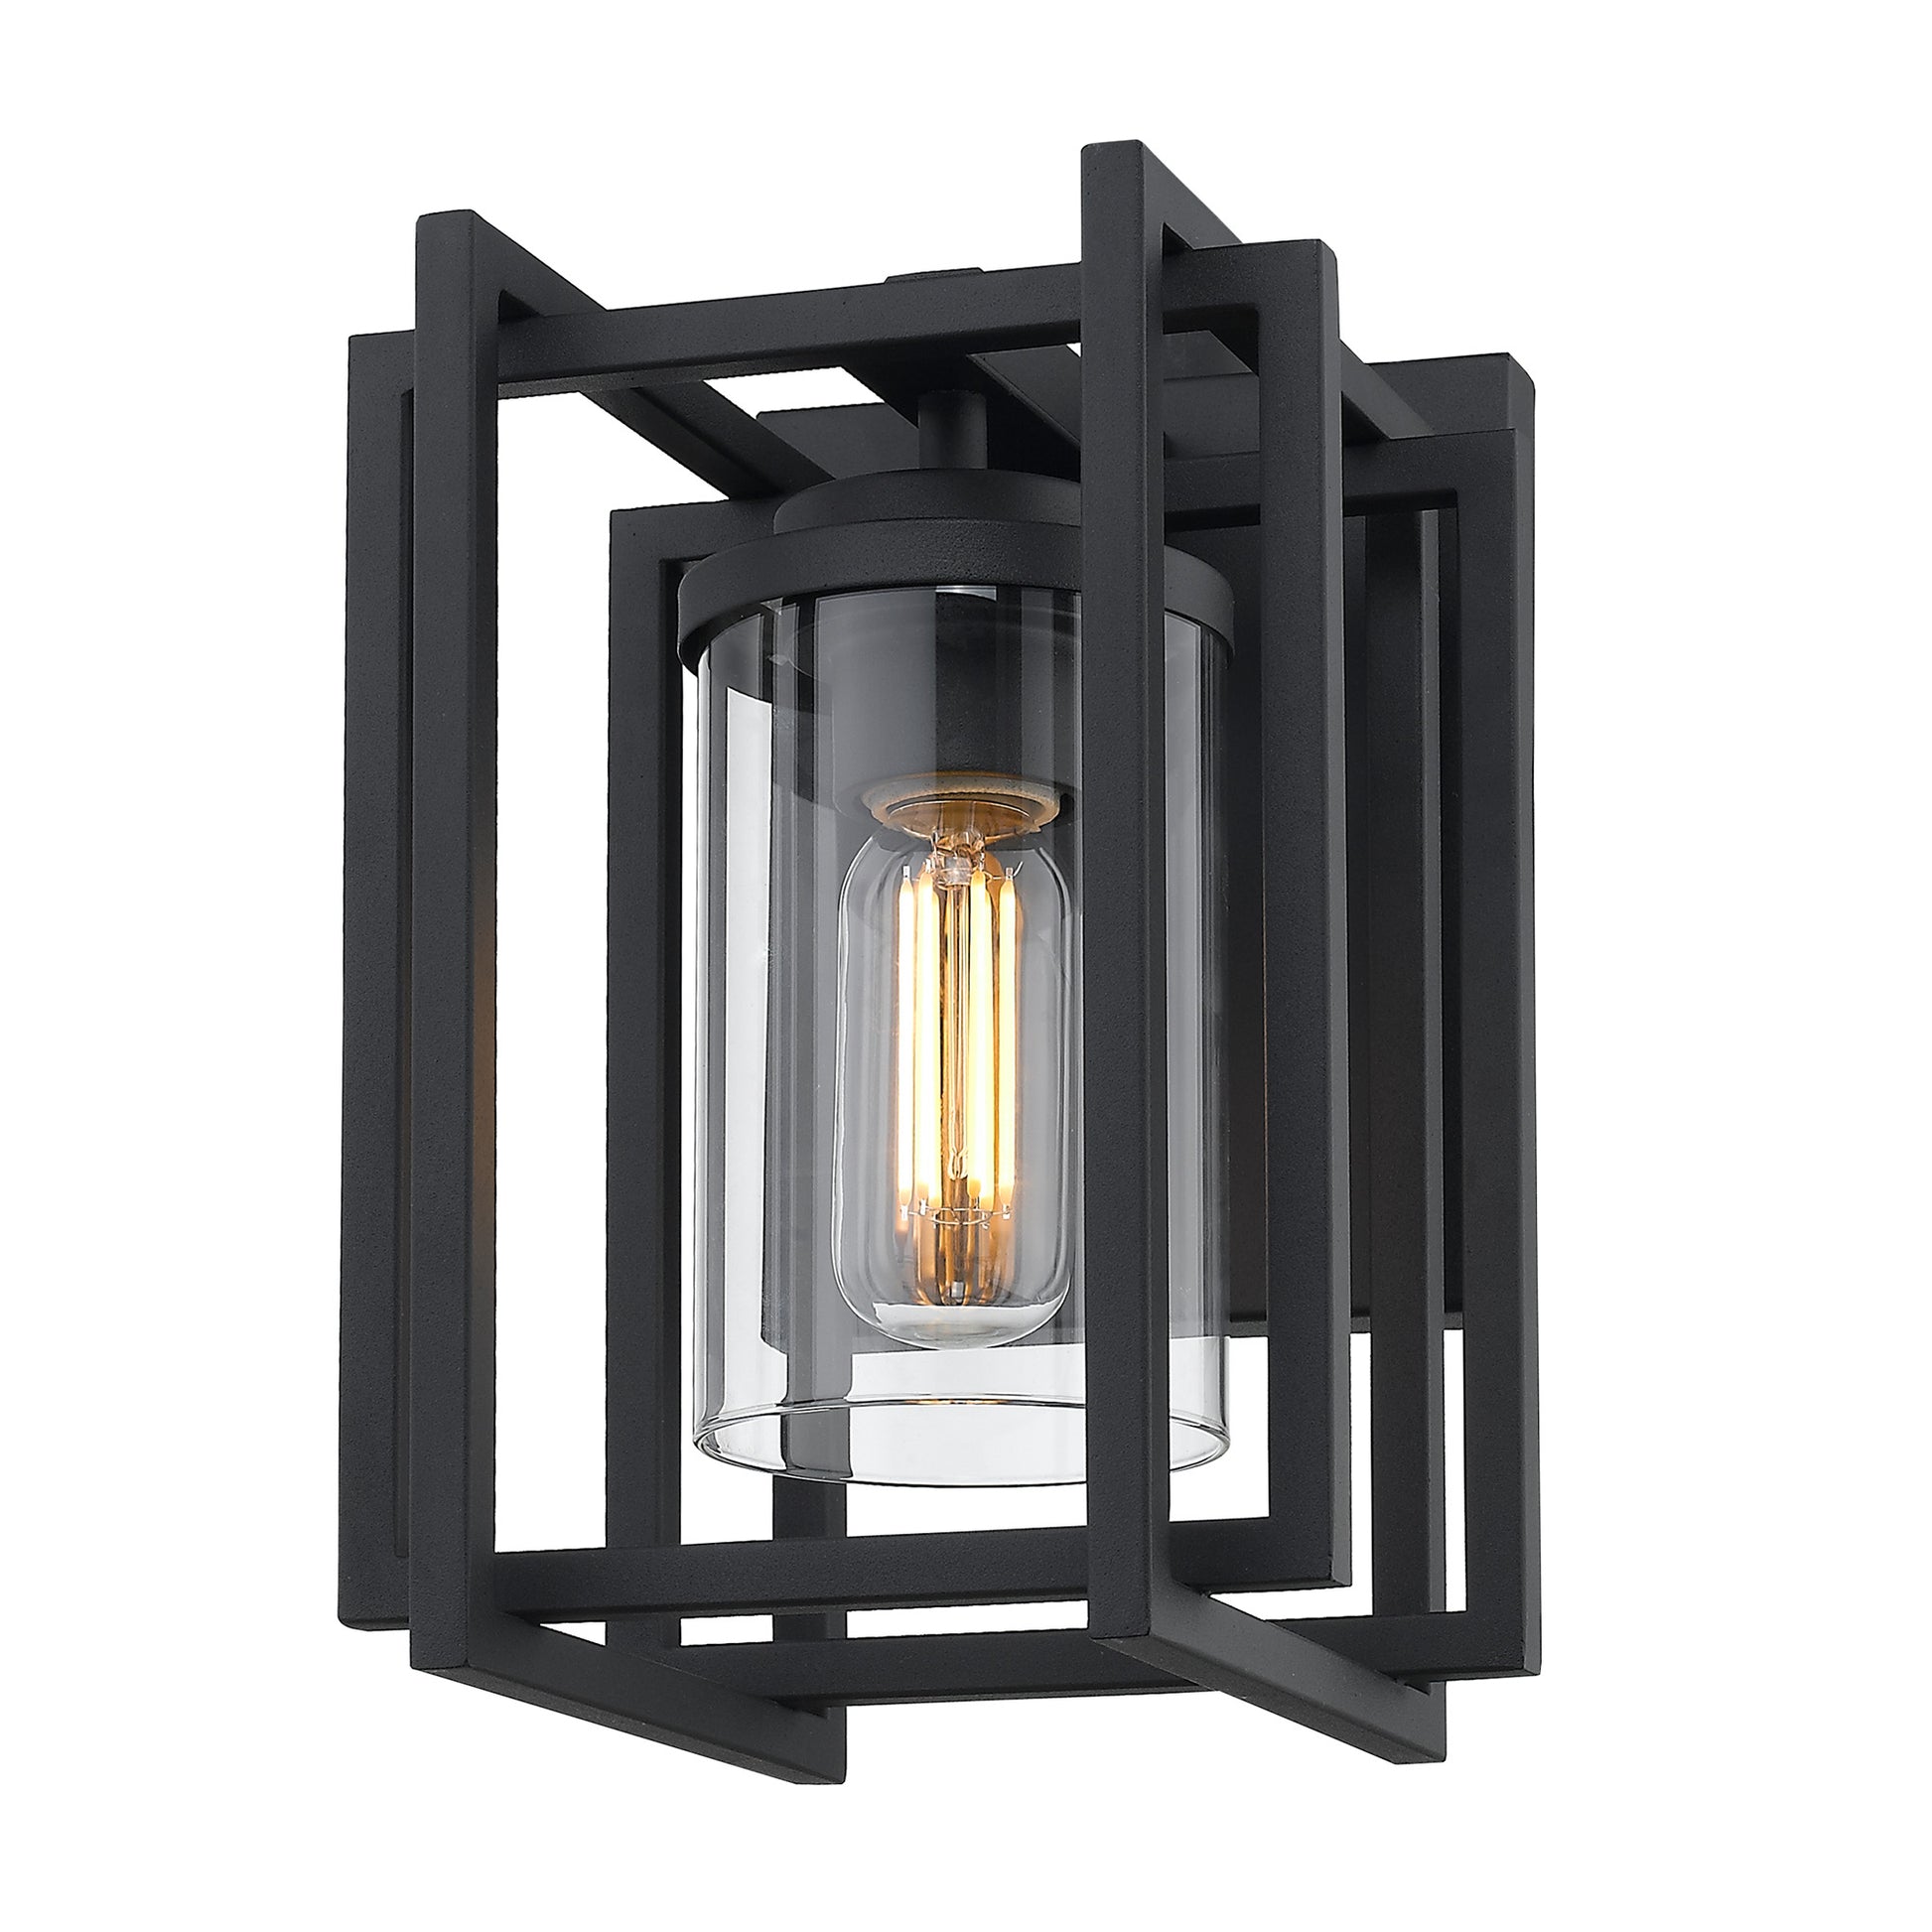 Modern | Industrial-Inspired Small Outdoor Wall Sconce